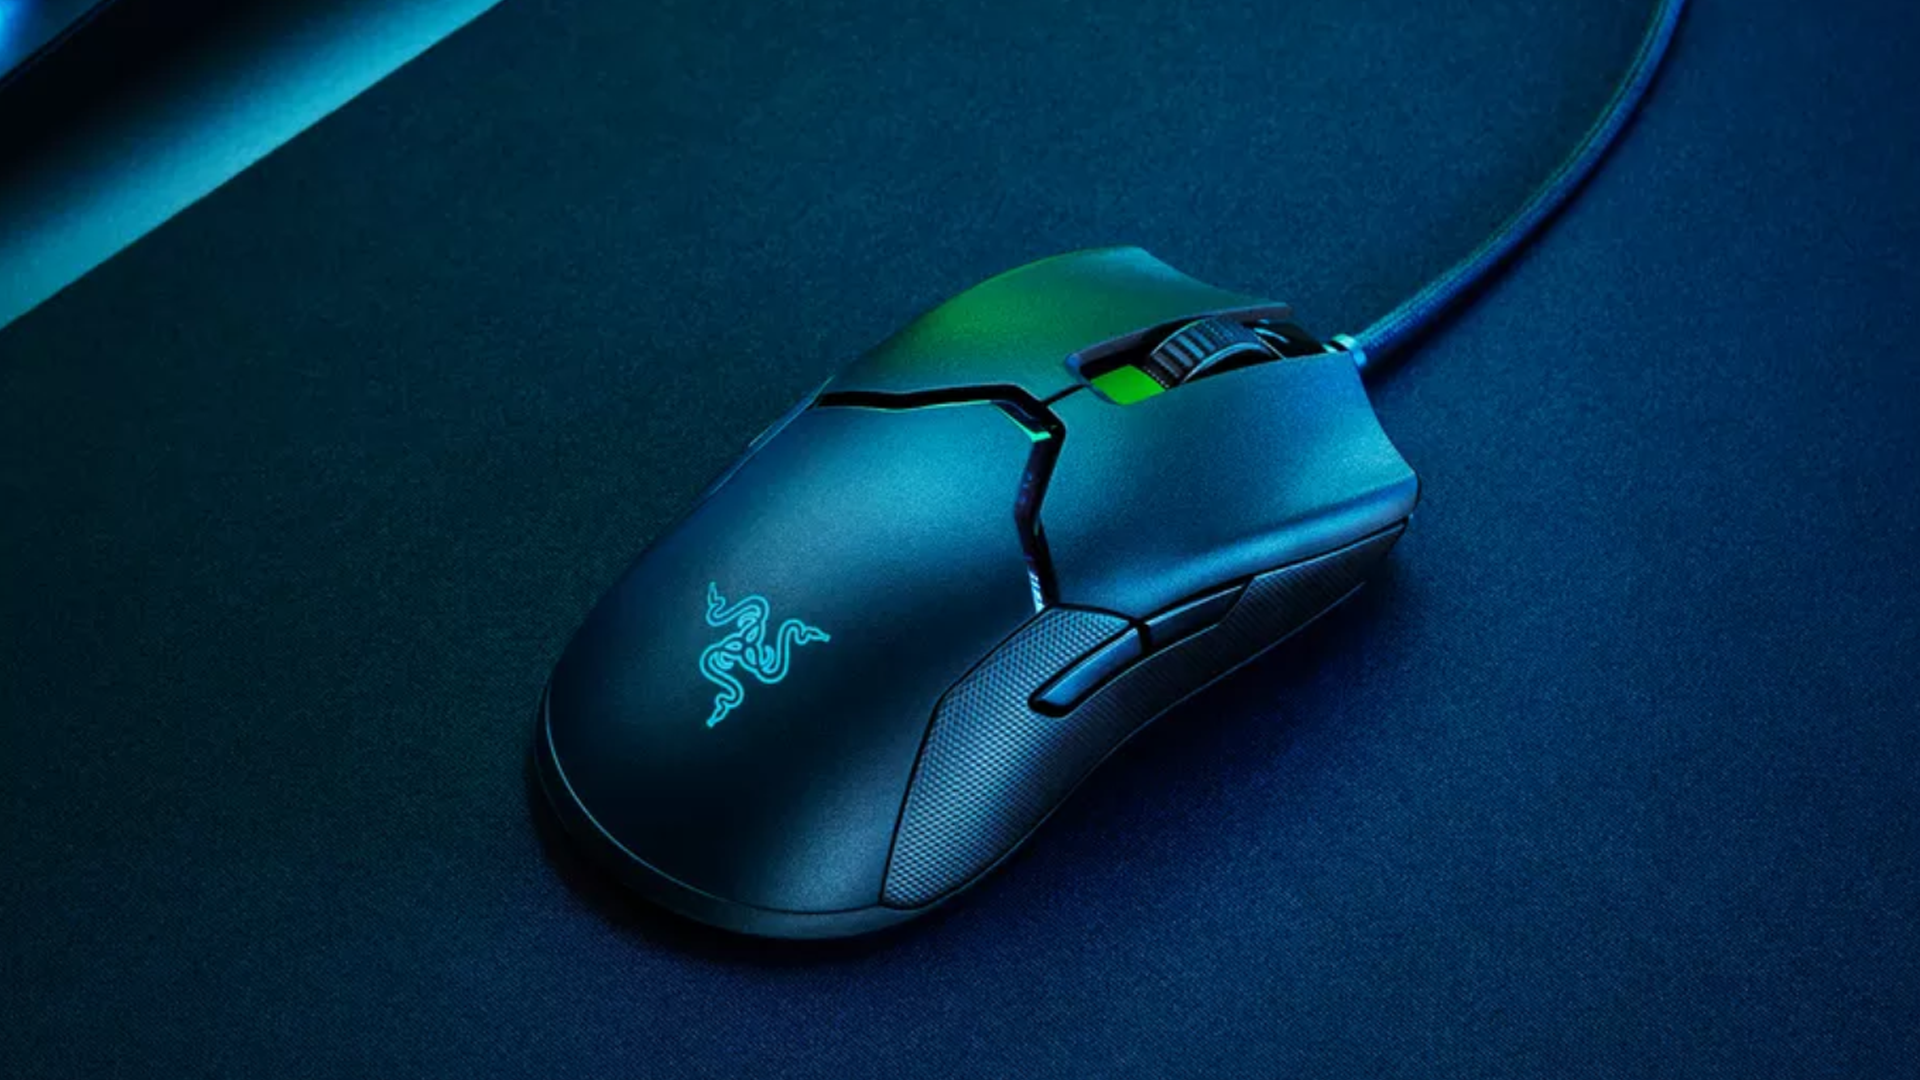 Windows 10’s Security Falls Apart When You Plug In a Razer Mouse or Keyboard